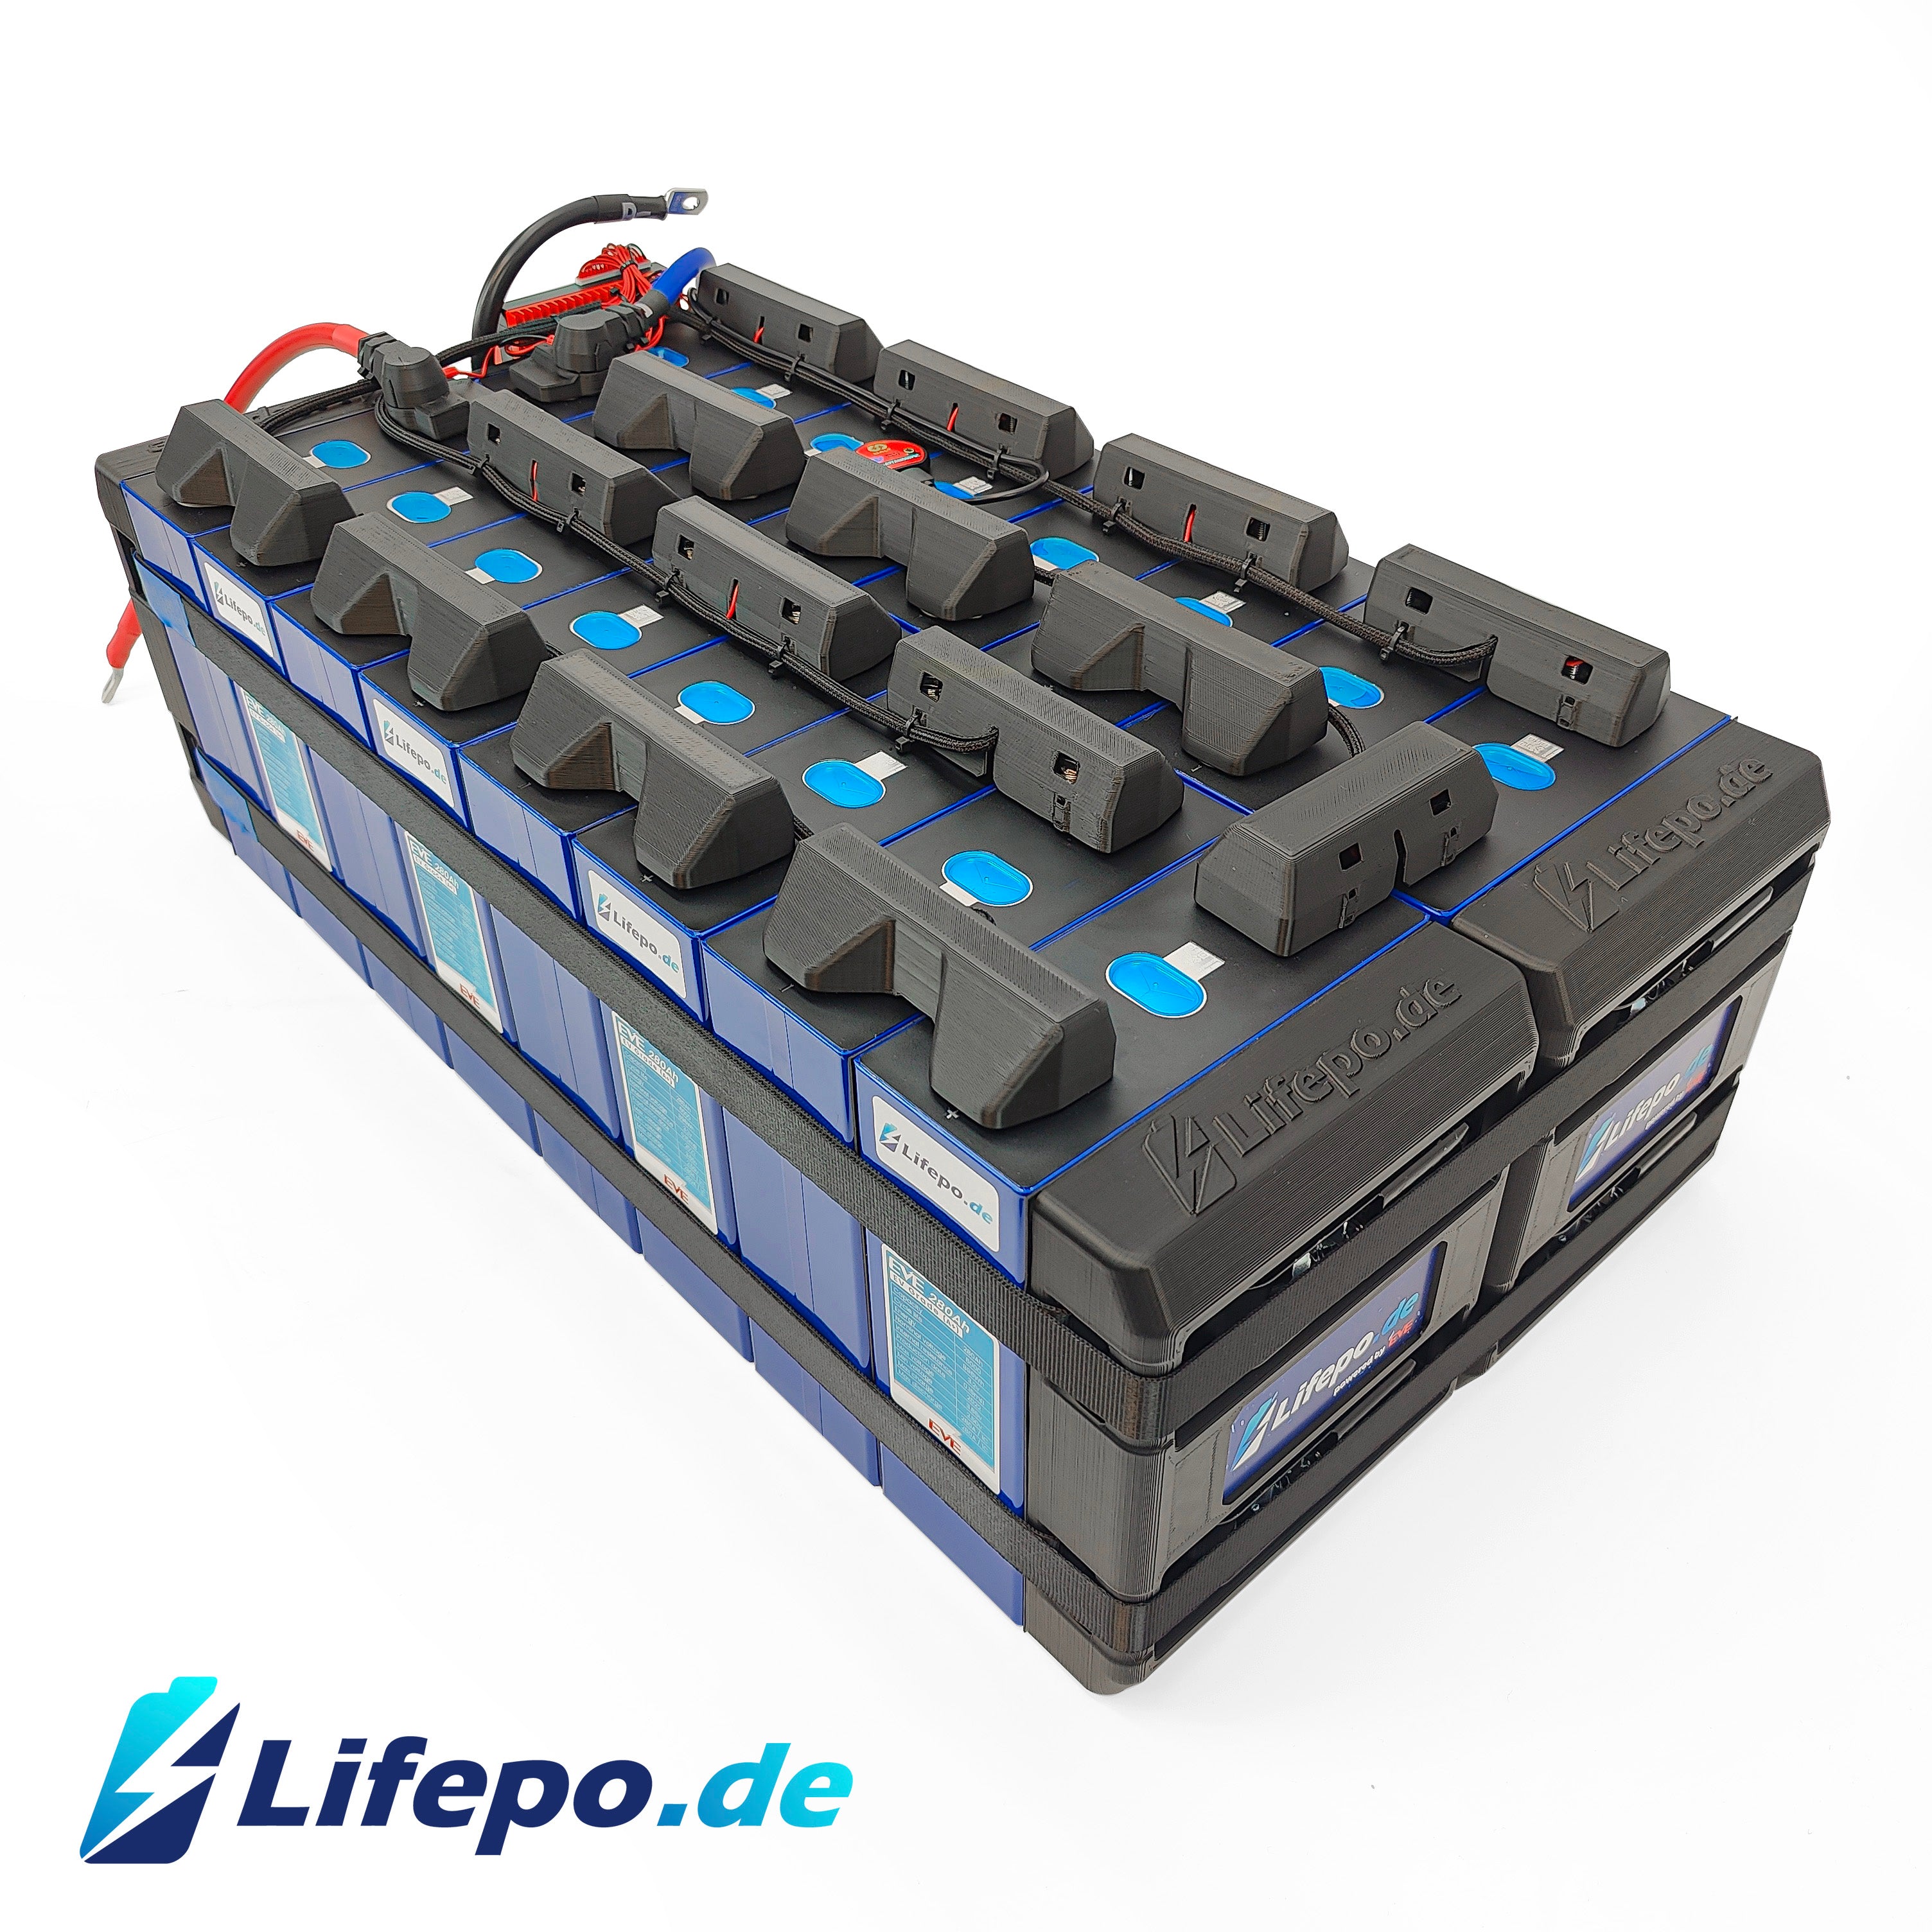 48v 280Ah Lifepo4 battery system with EVE Grade A+ 15.2kWh